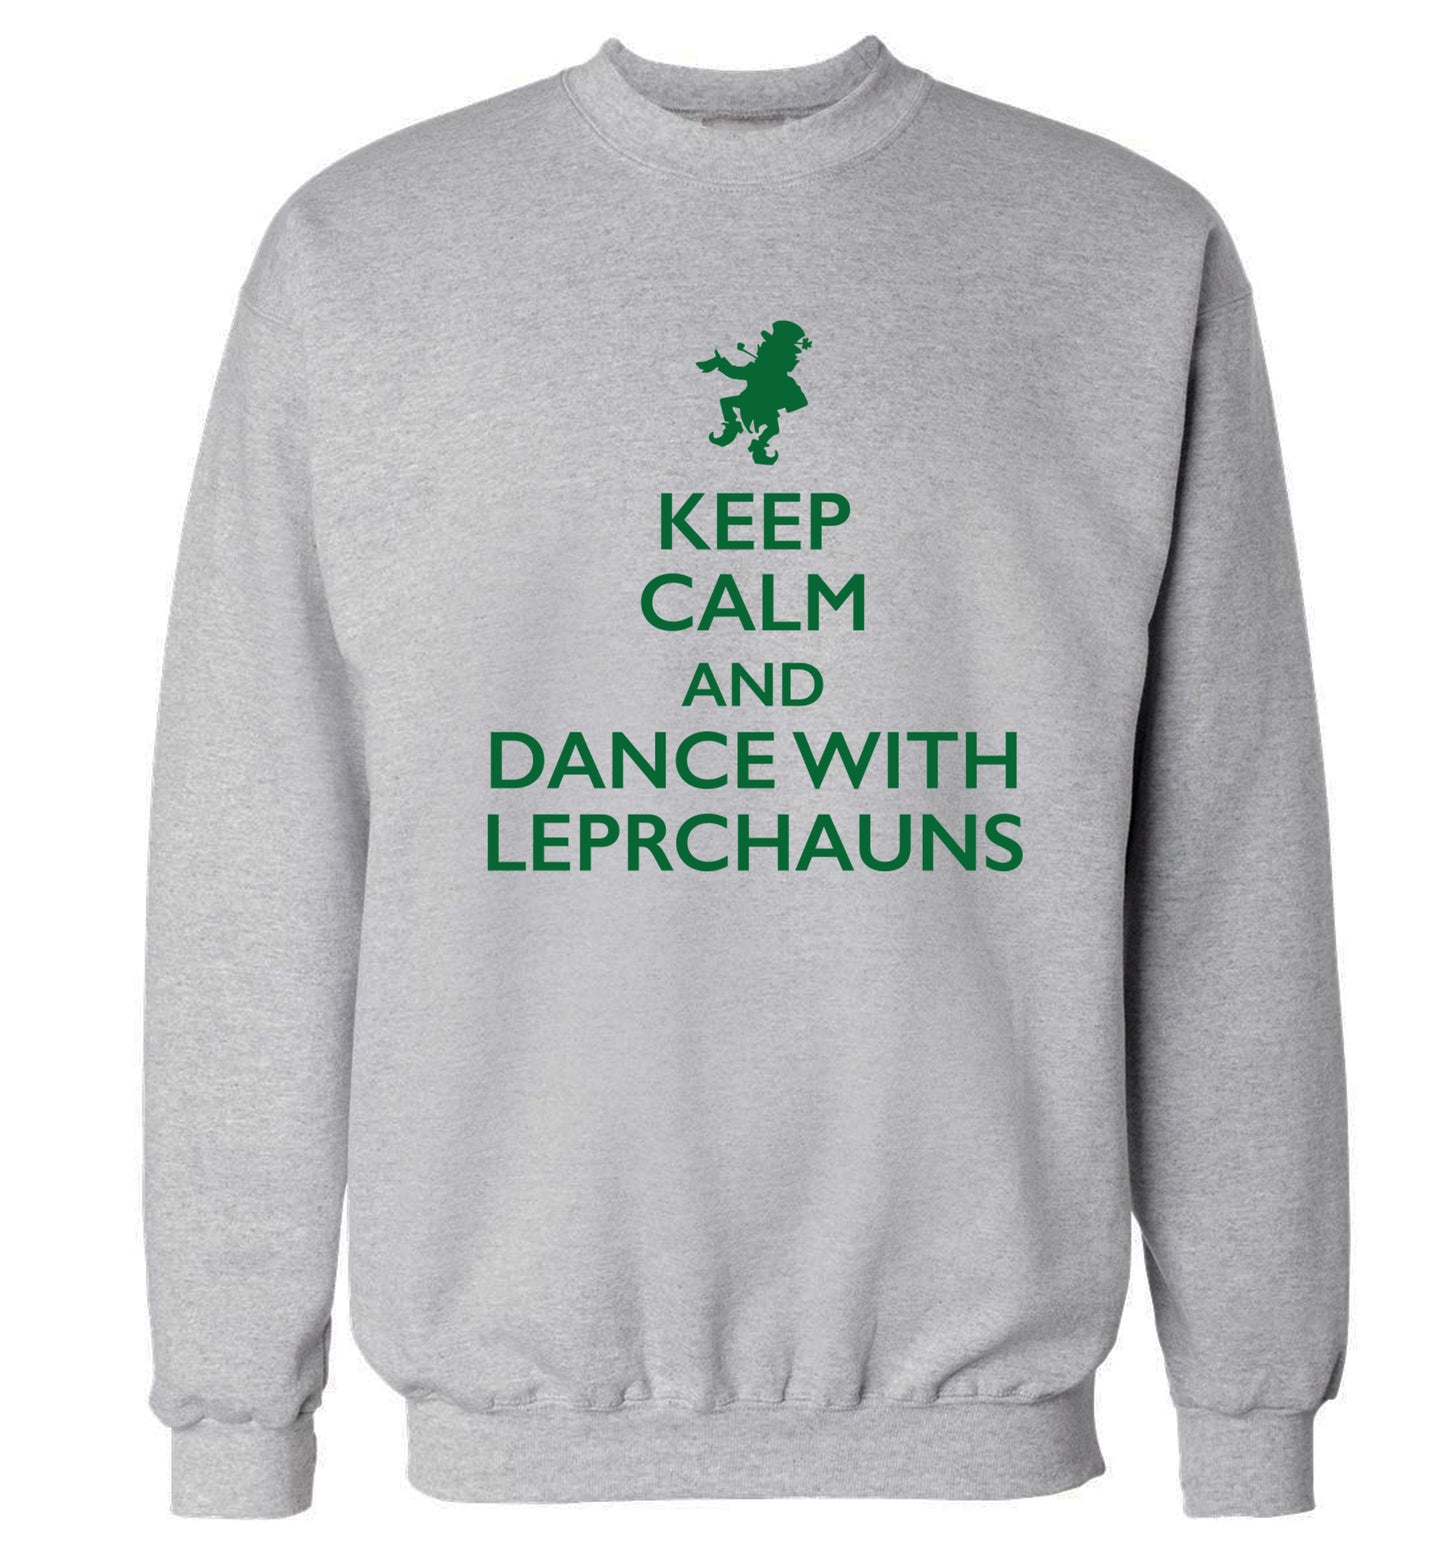 Keep calm and dance with leprechauns Adult's unisex grey Sweater 2XL